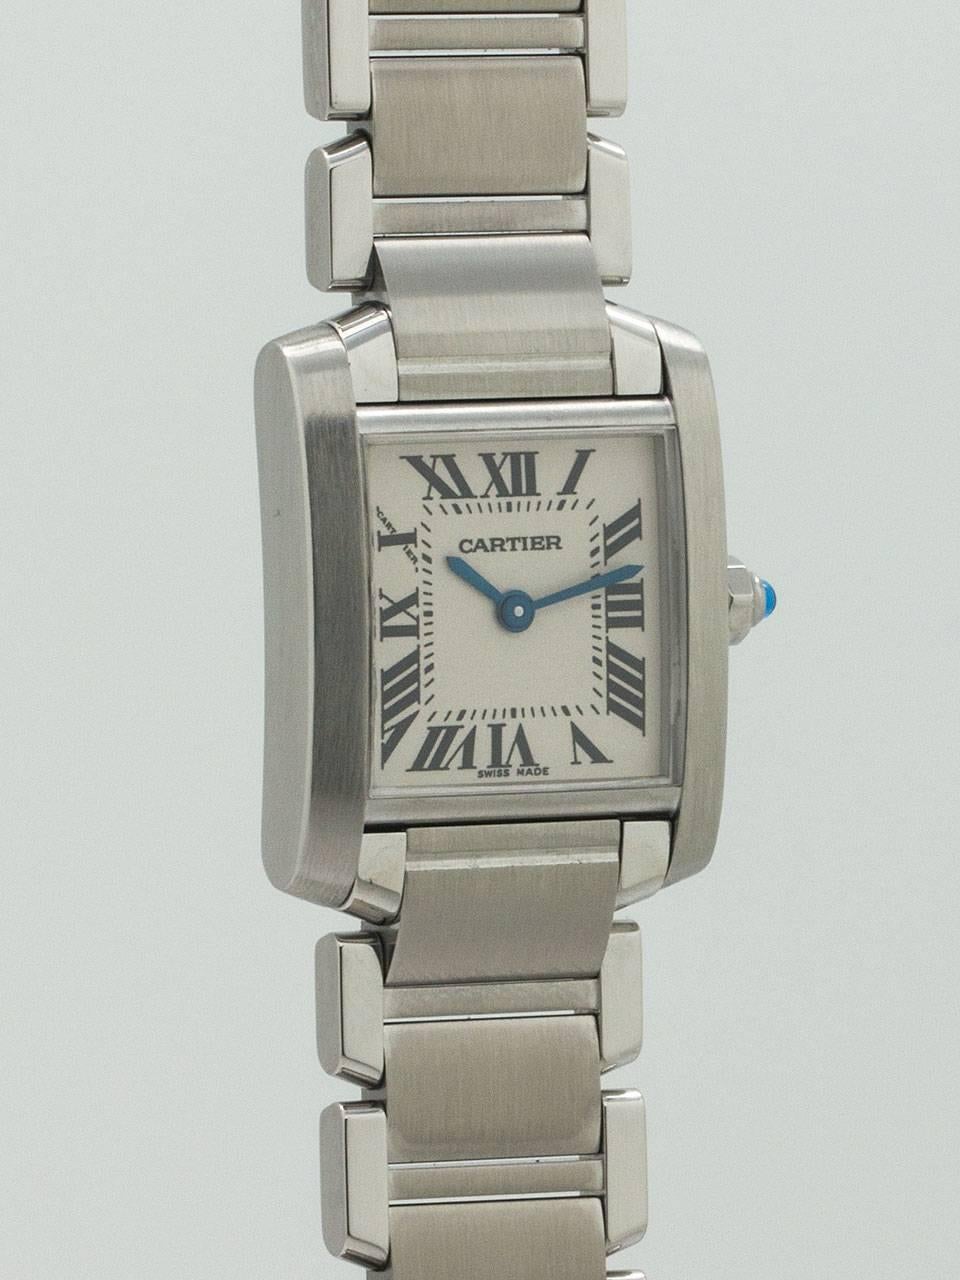 Cartier Stainless Steel Lady's Tank Francaise circa 2000s. Measuring 20 x 25mm with sapphire crystal and sapphire cabochon crown. Classic white dial with black Roman numerals and blue steel hands. Powered by quartz movement. On Cartier stainless